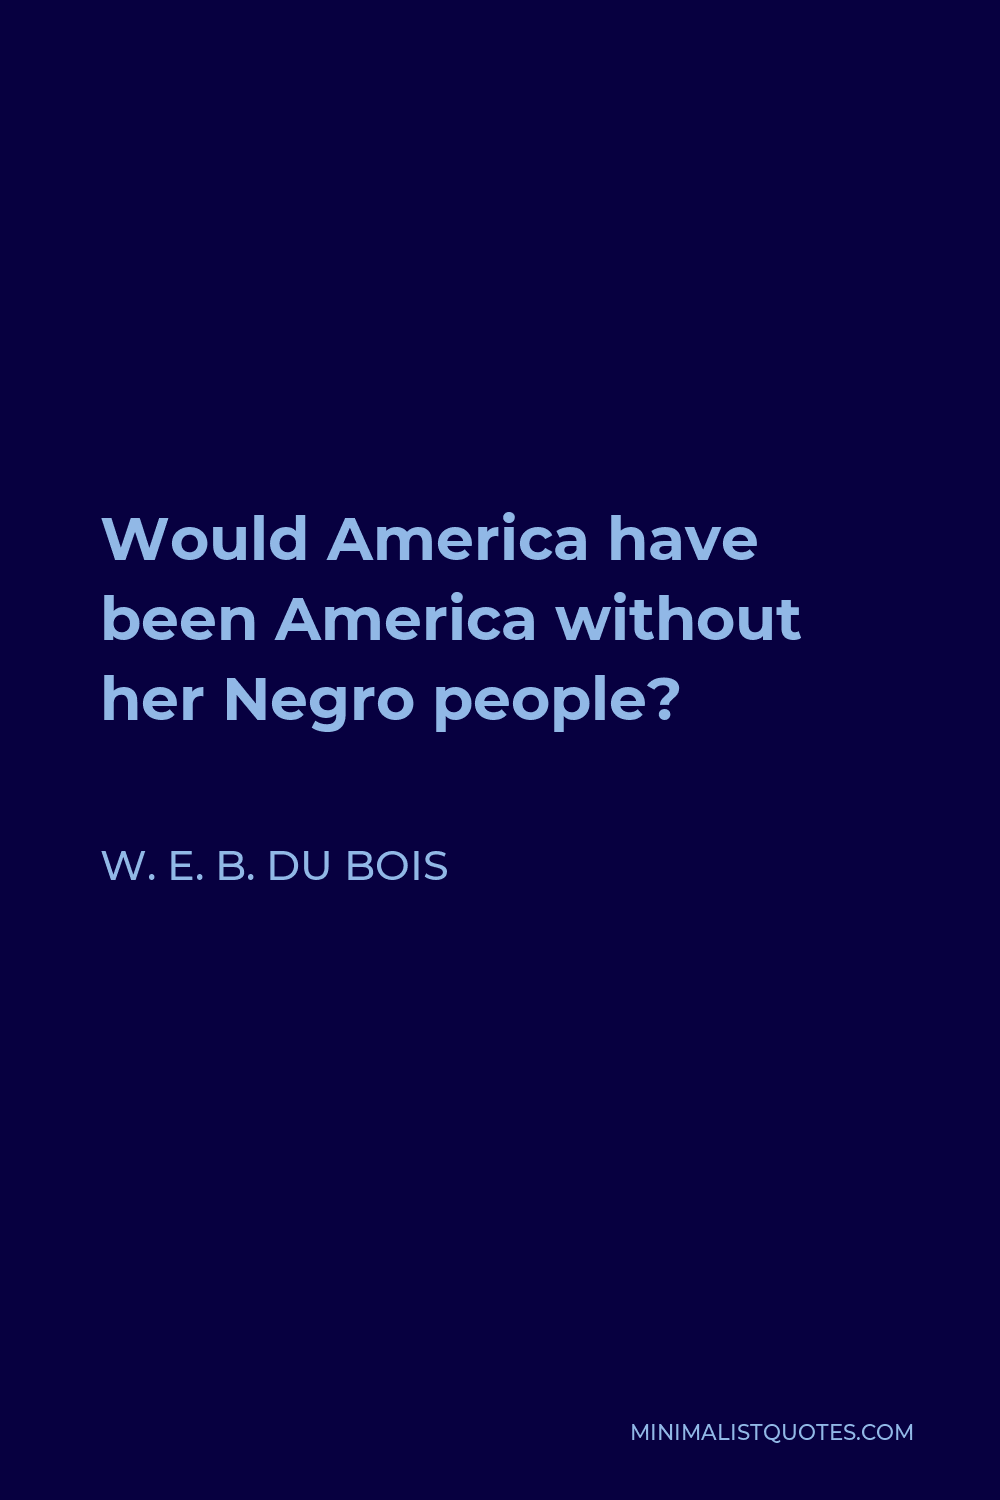 W. E. B. Du Bois Quote - Would America have been America without her Negro people?